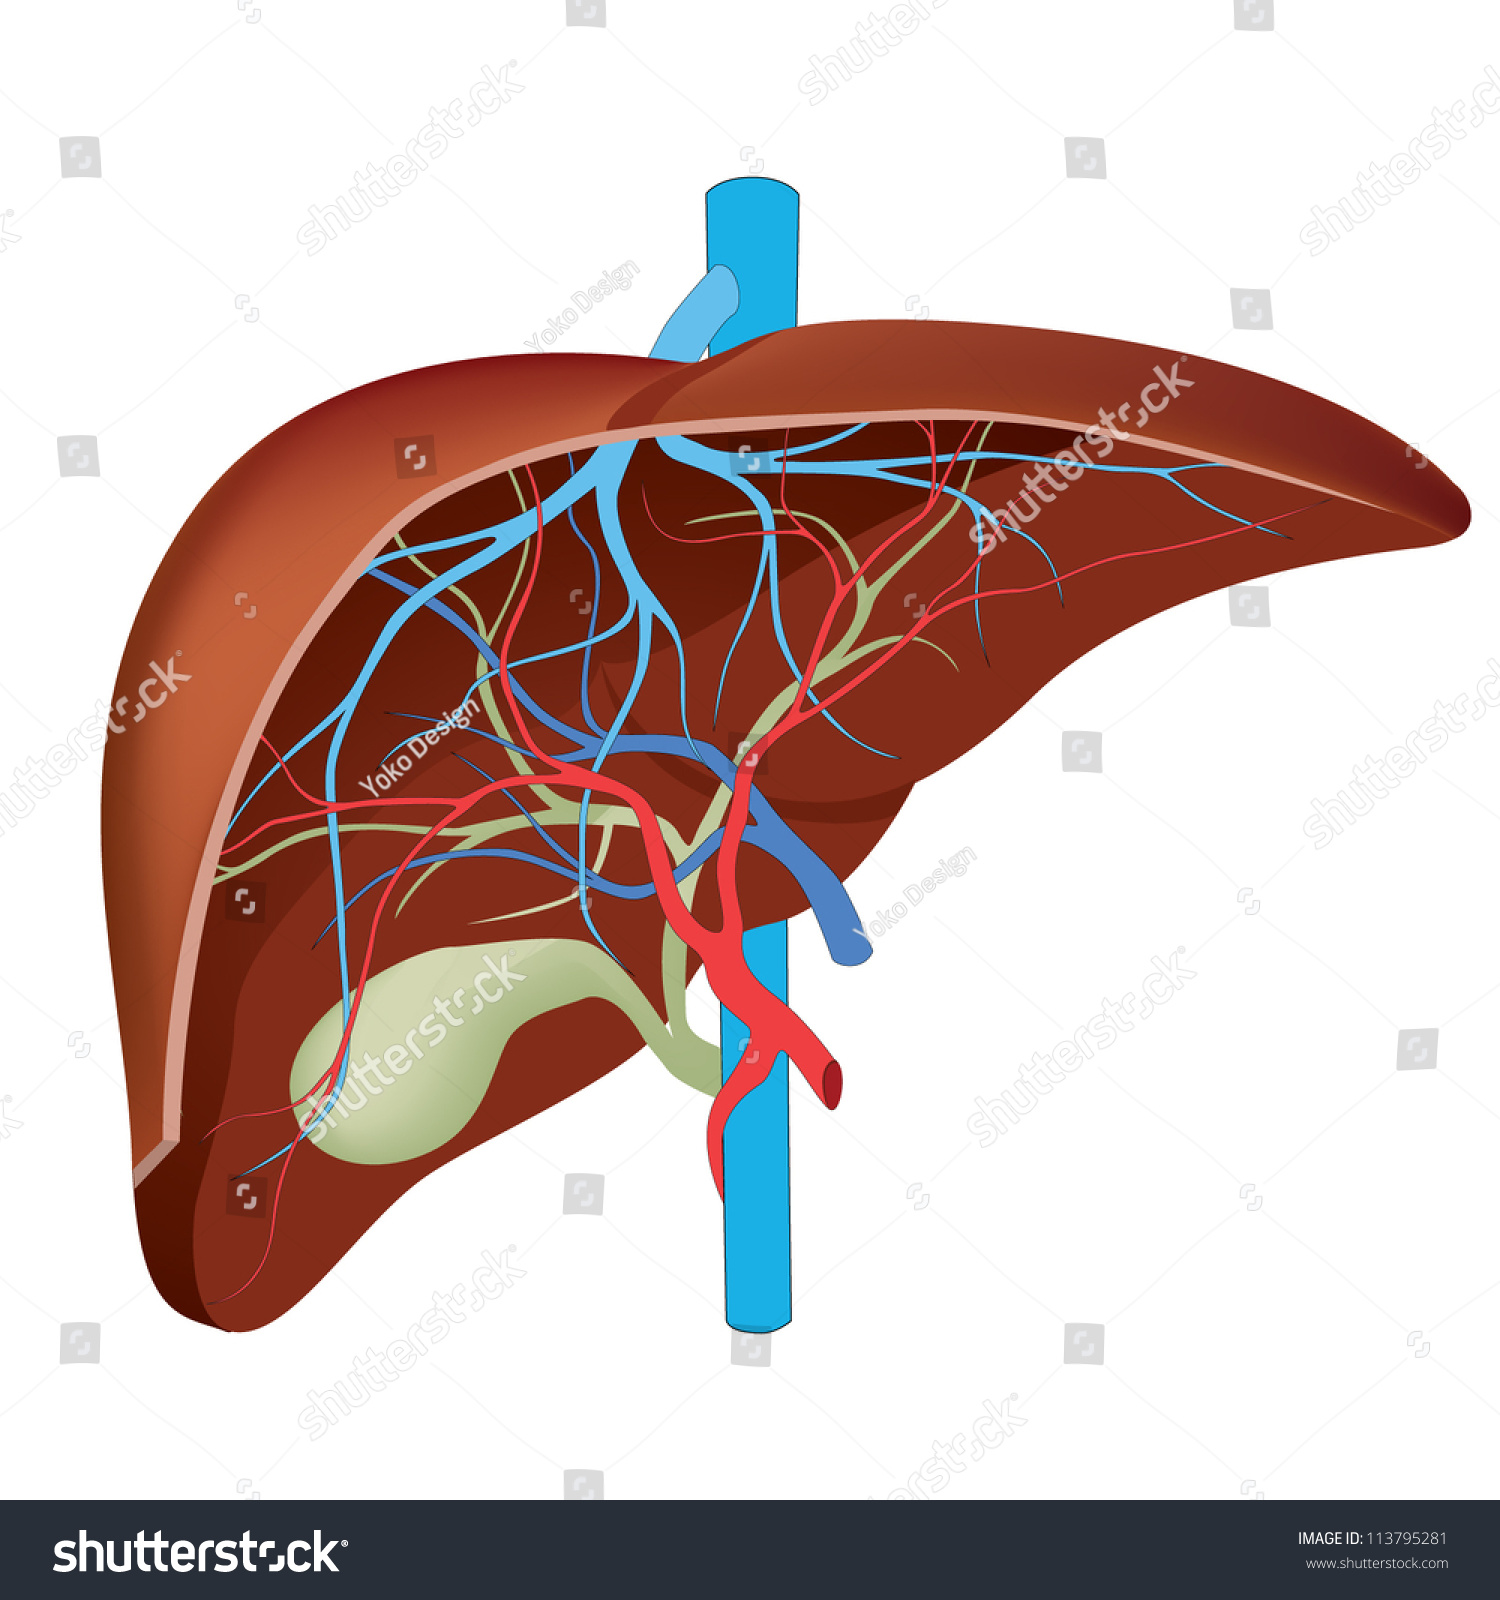 Liver. Structure Of The Human Liver. Scientifically Accurate. Stock